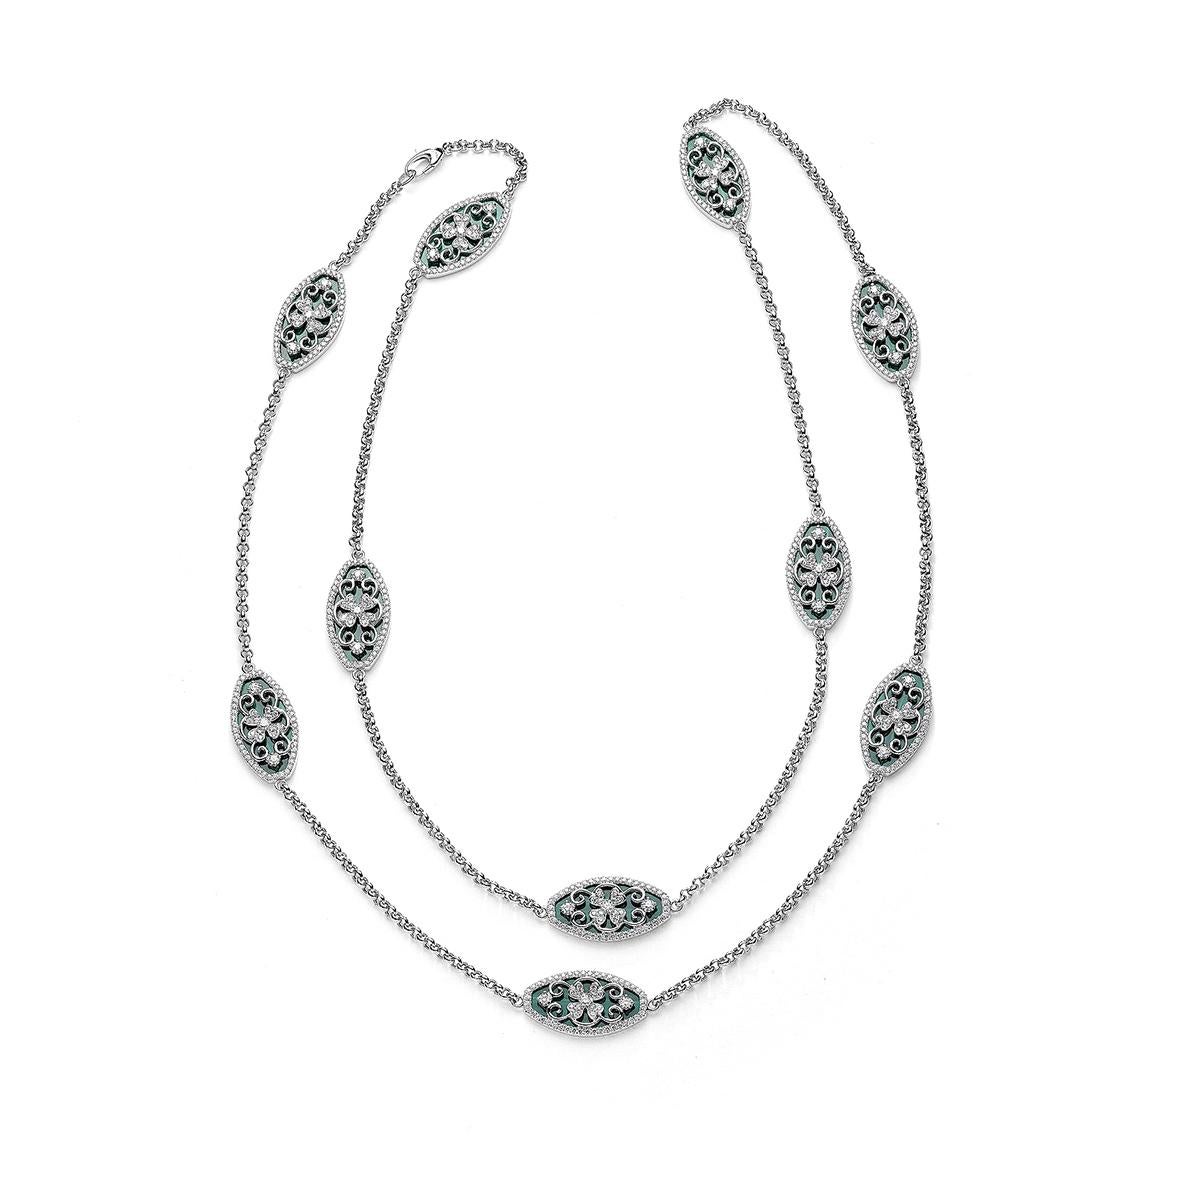 Necklace in 18kt white gold set with 590 diamonds 7.12 cts and 10 malachites 61.18 cts